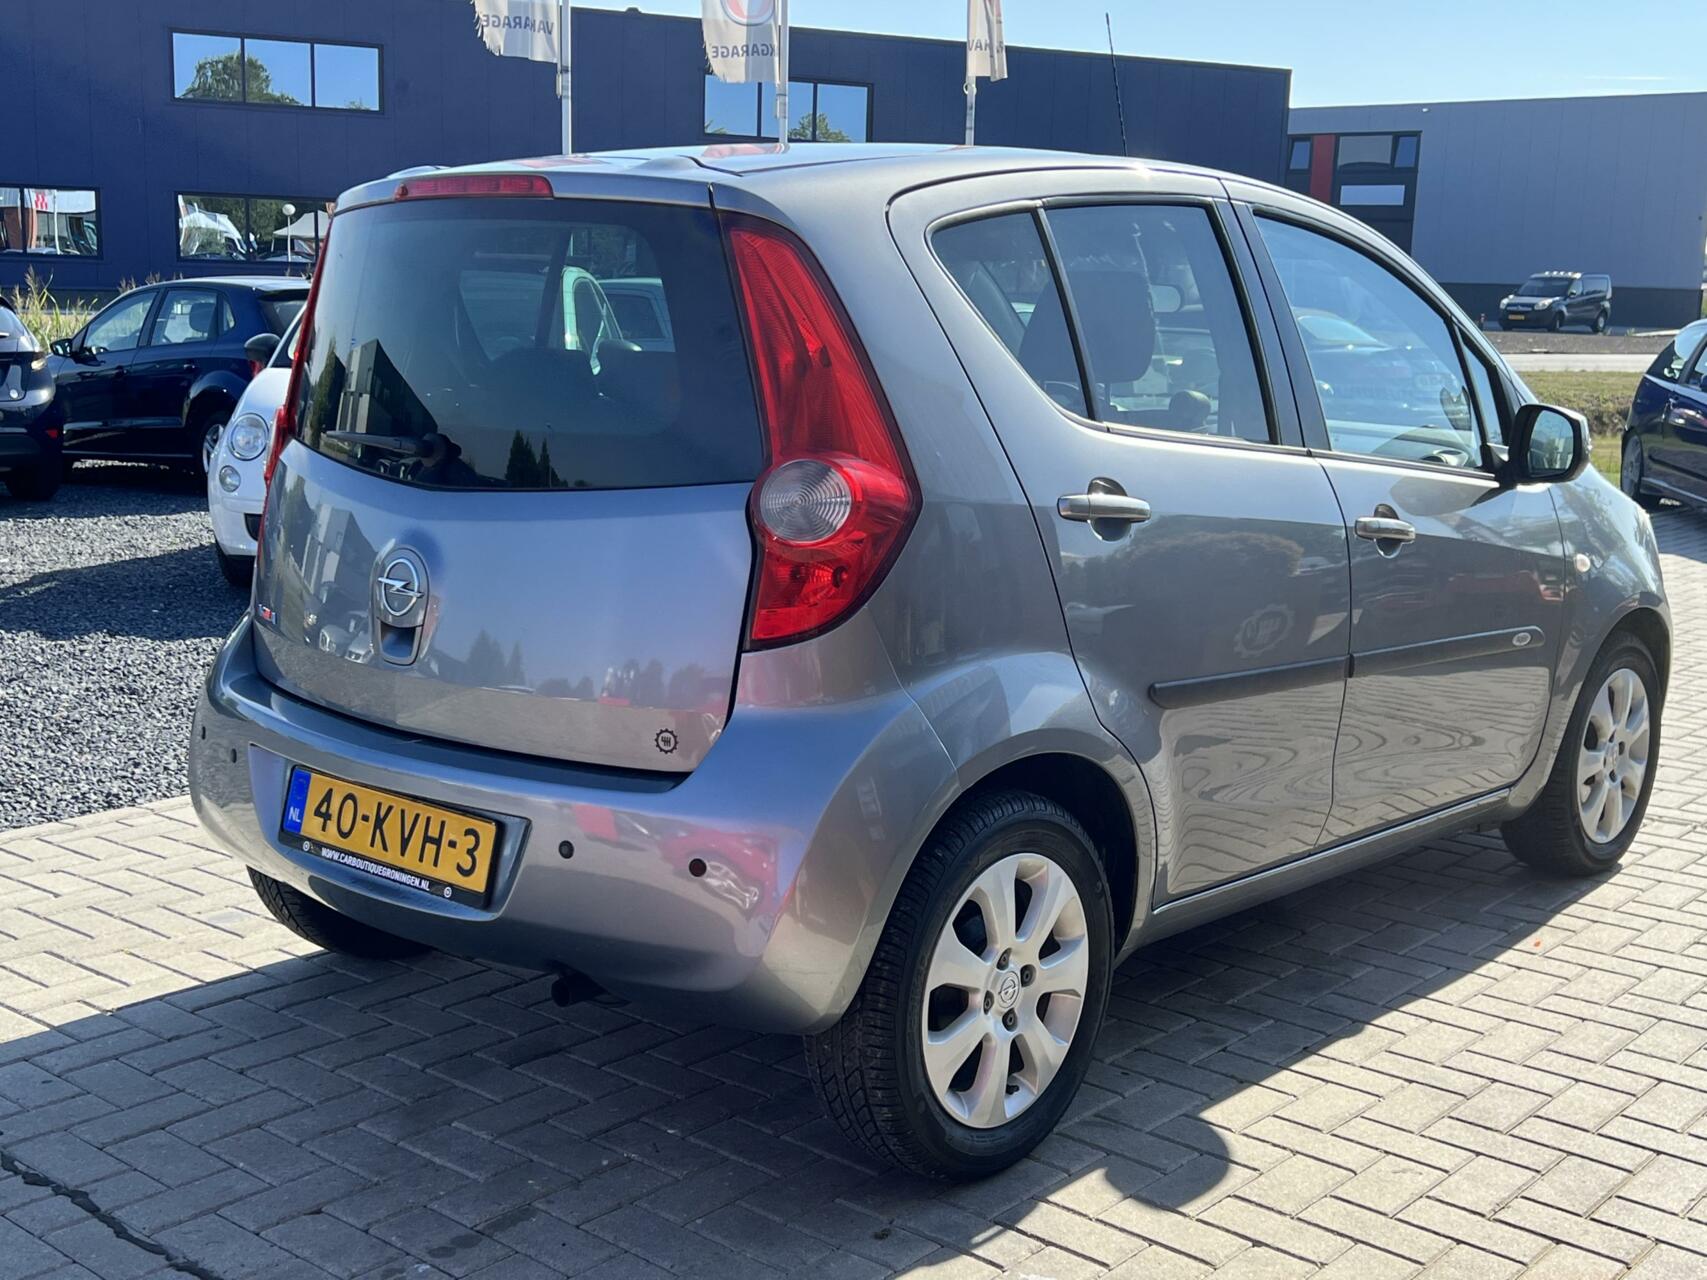 Caroutlet Groningen - Opel Agila 1.2 Edition | 5-DRS | AIRCO | NAP | PDC |